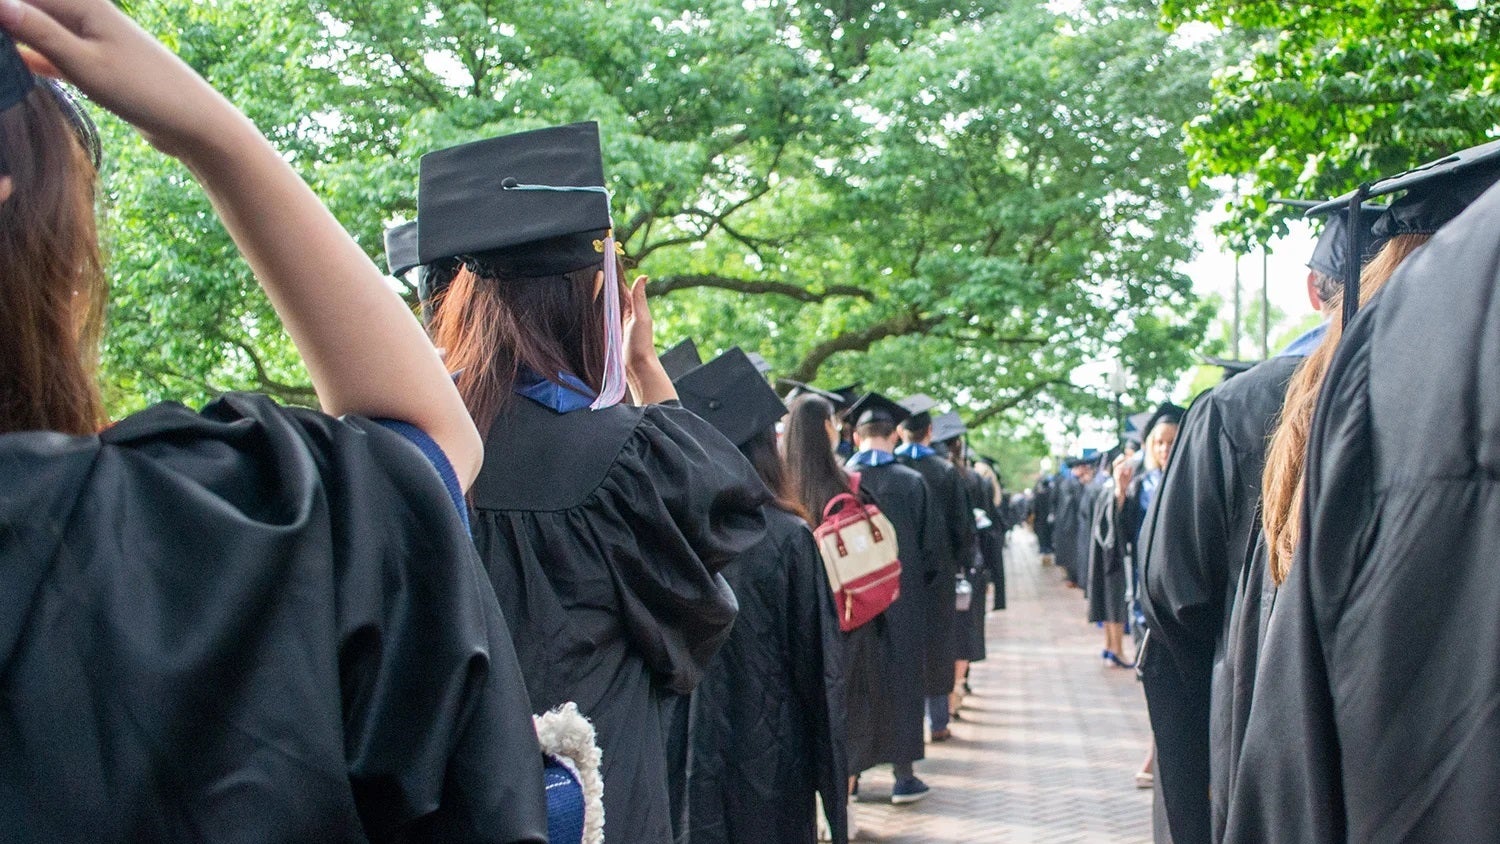 Students dressed in caps and gowns walk in line